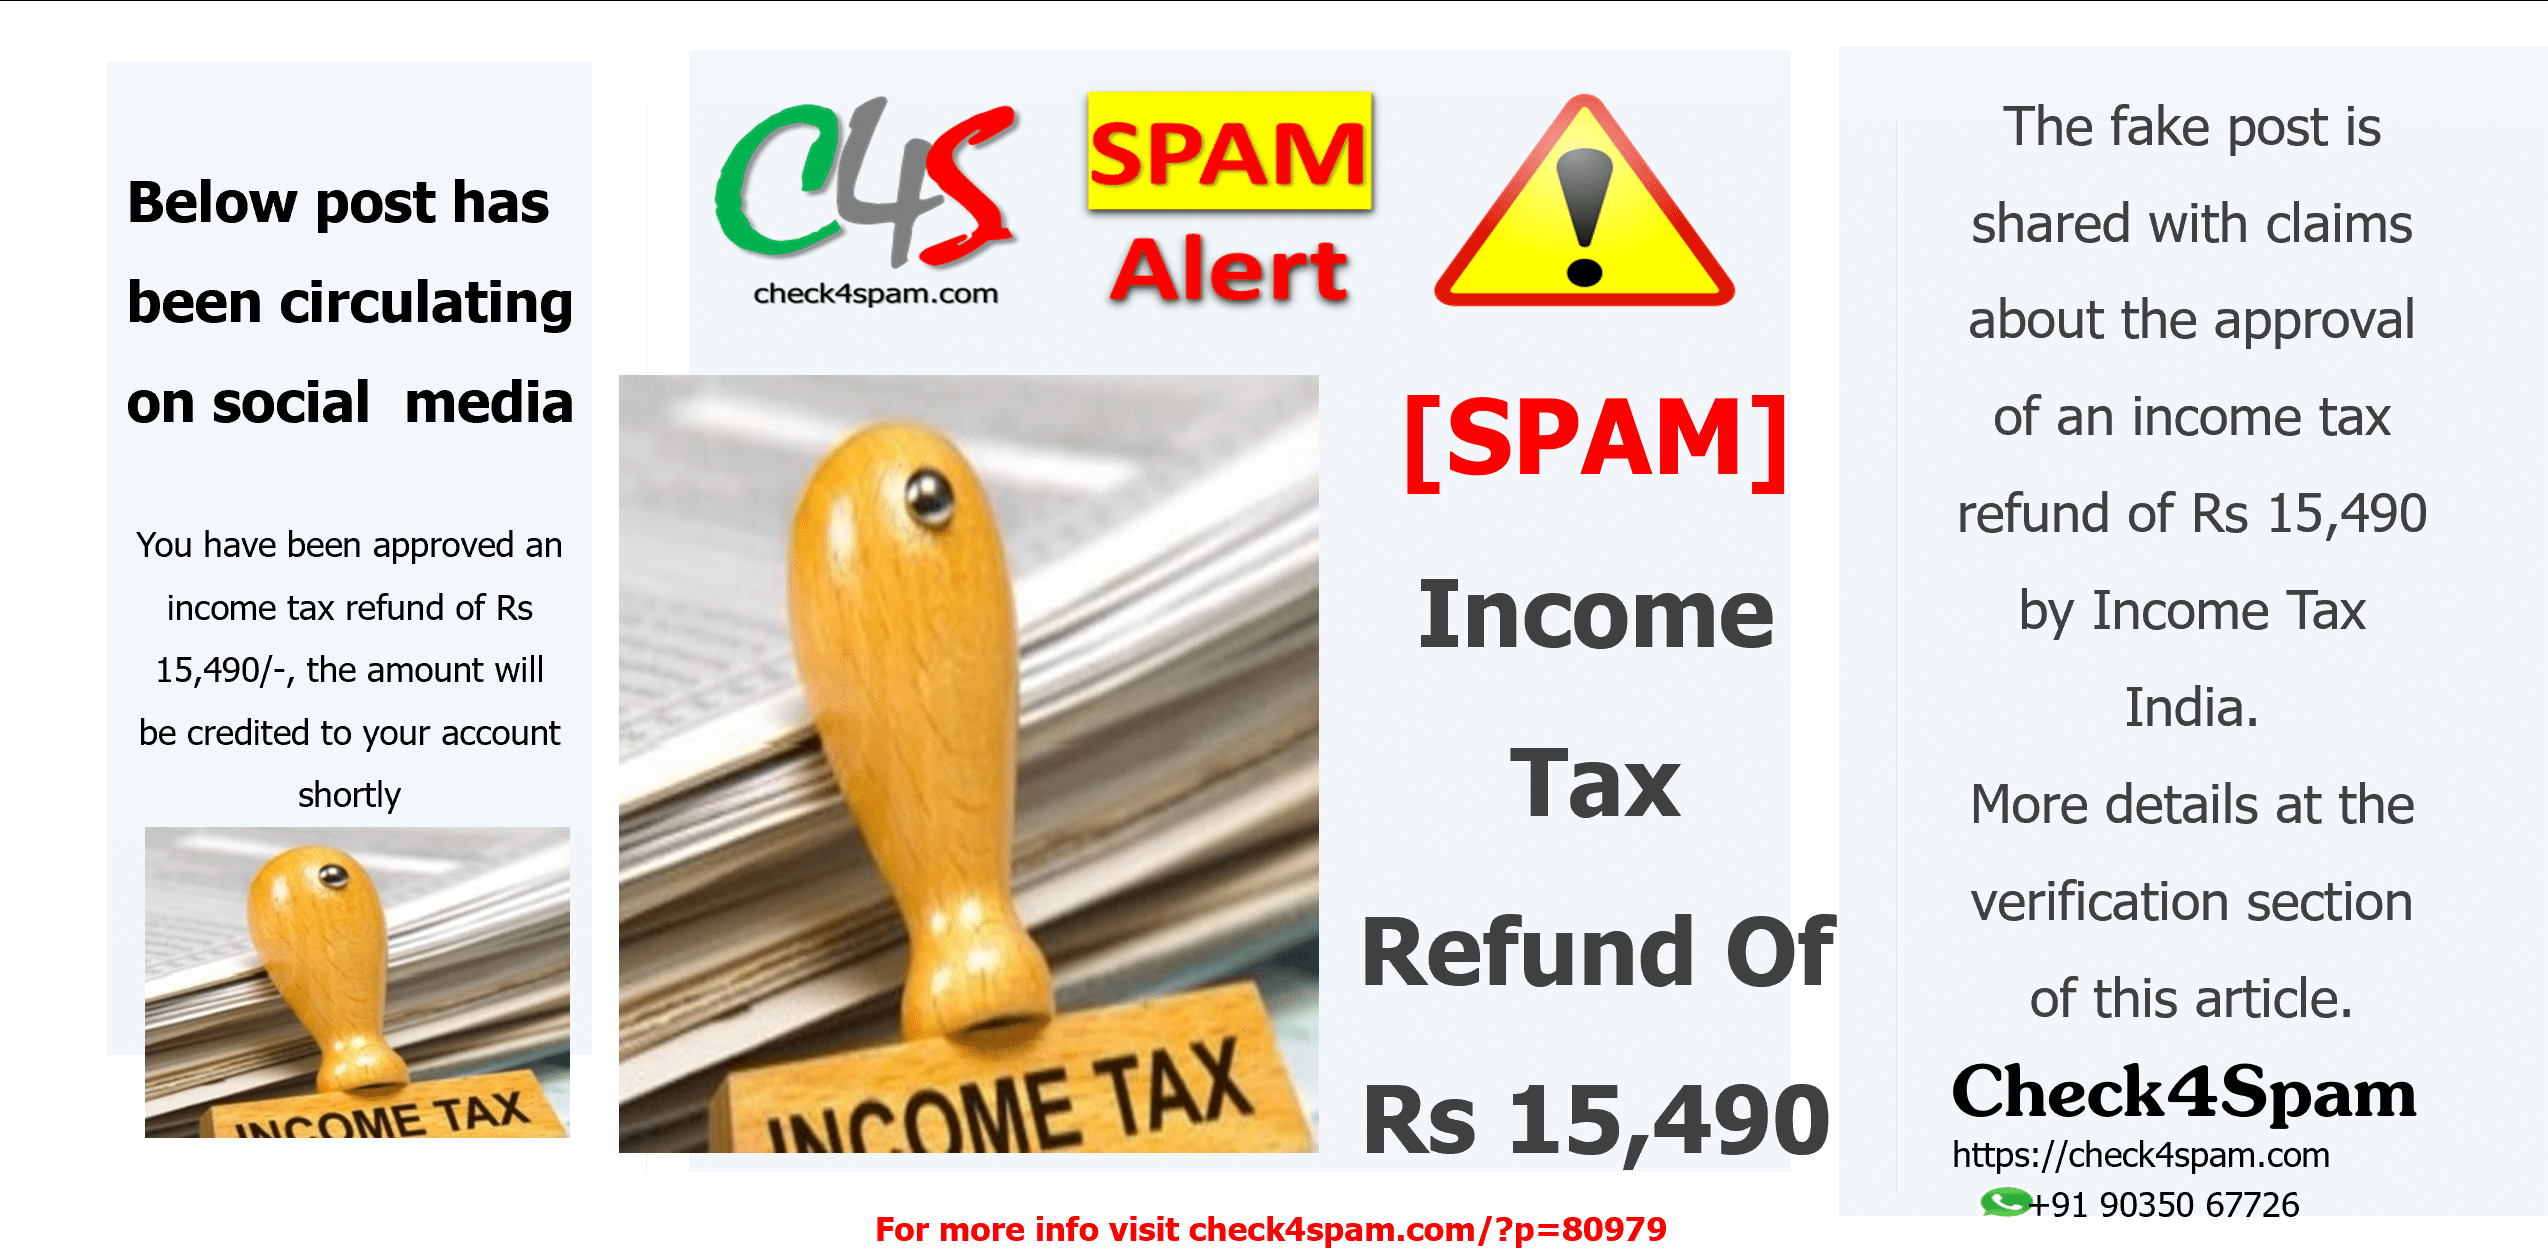 Income Tax Refund Of Rs 15,490